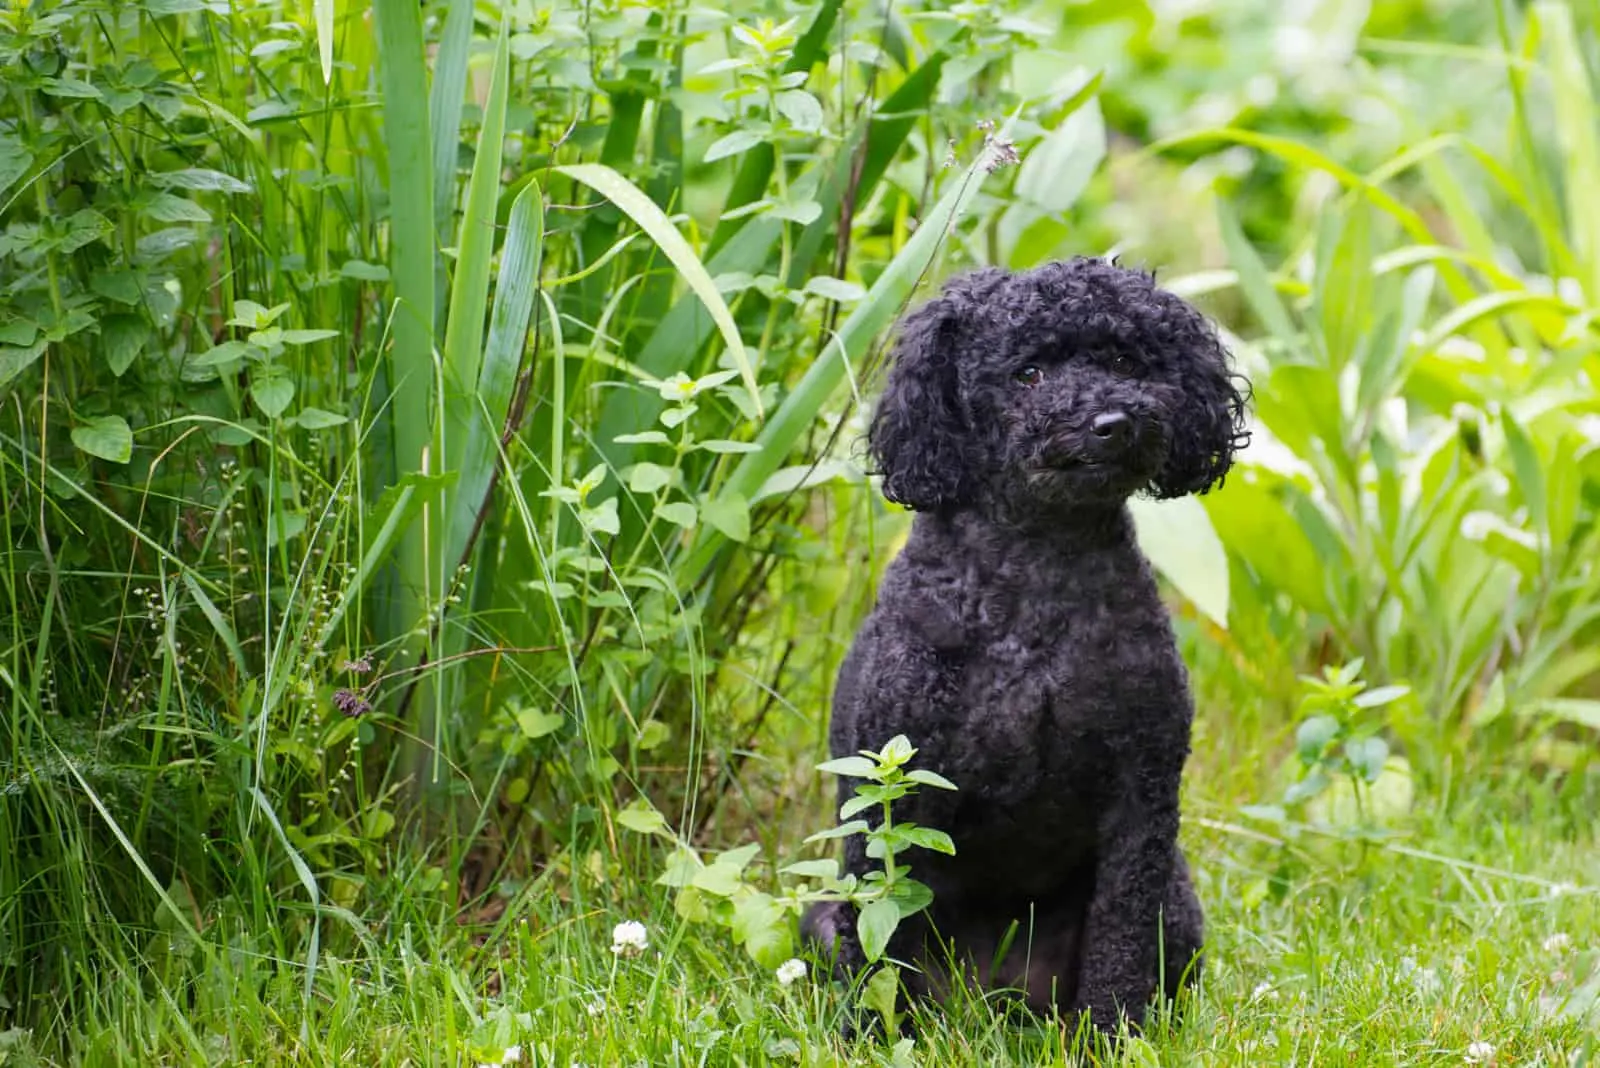 Miniature poodle with summer haircut